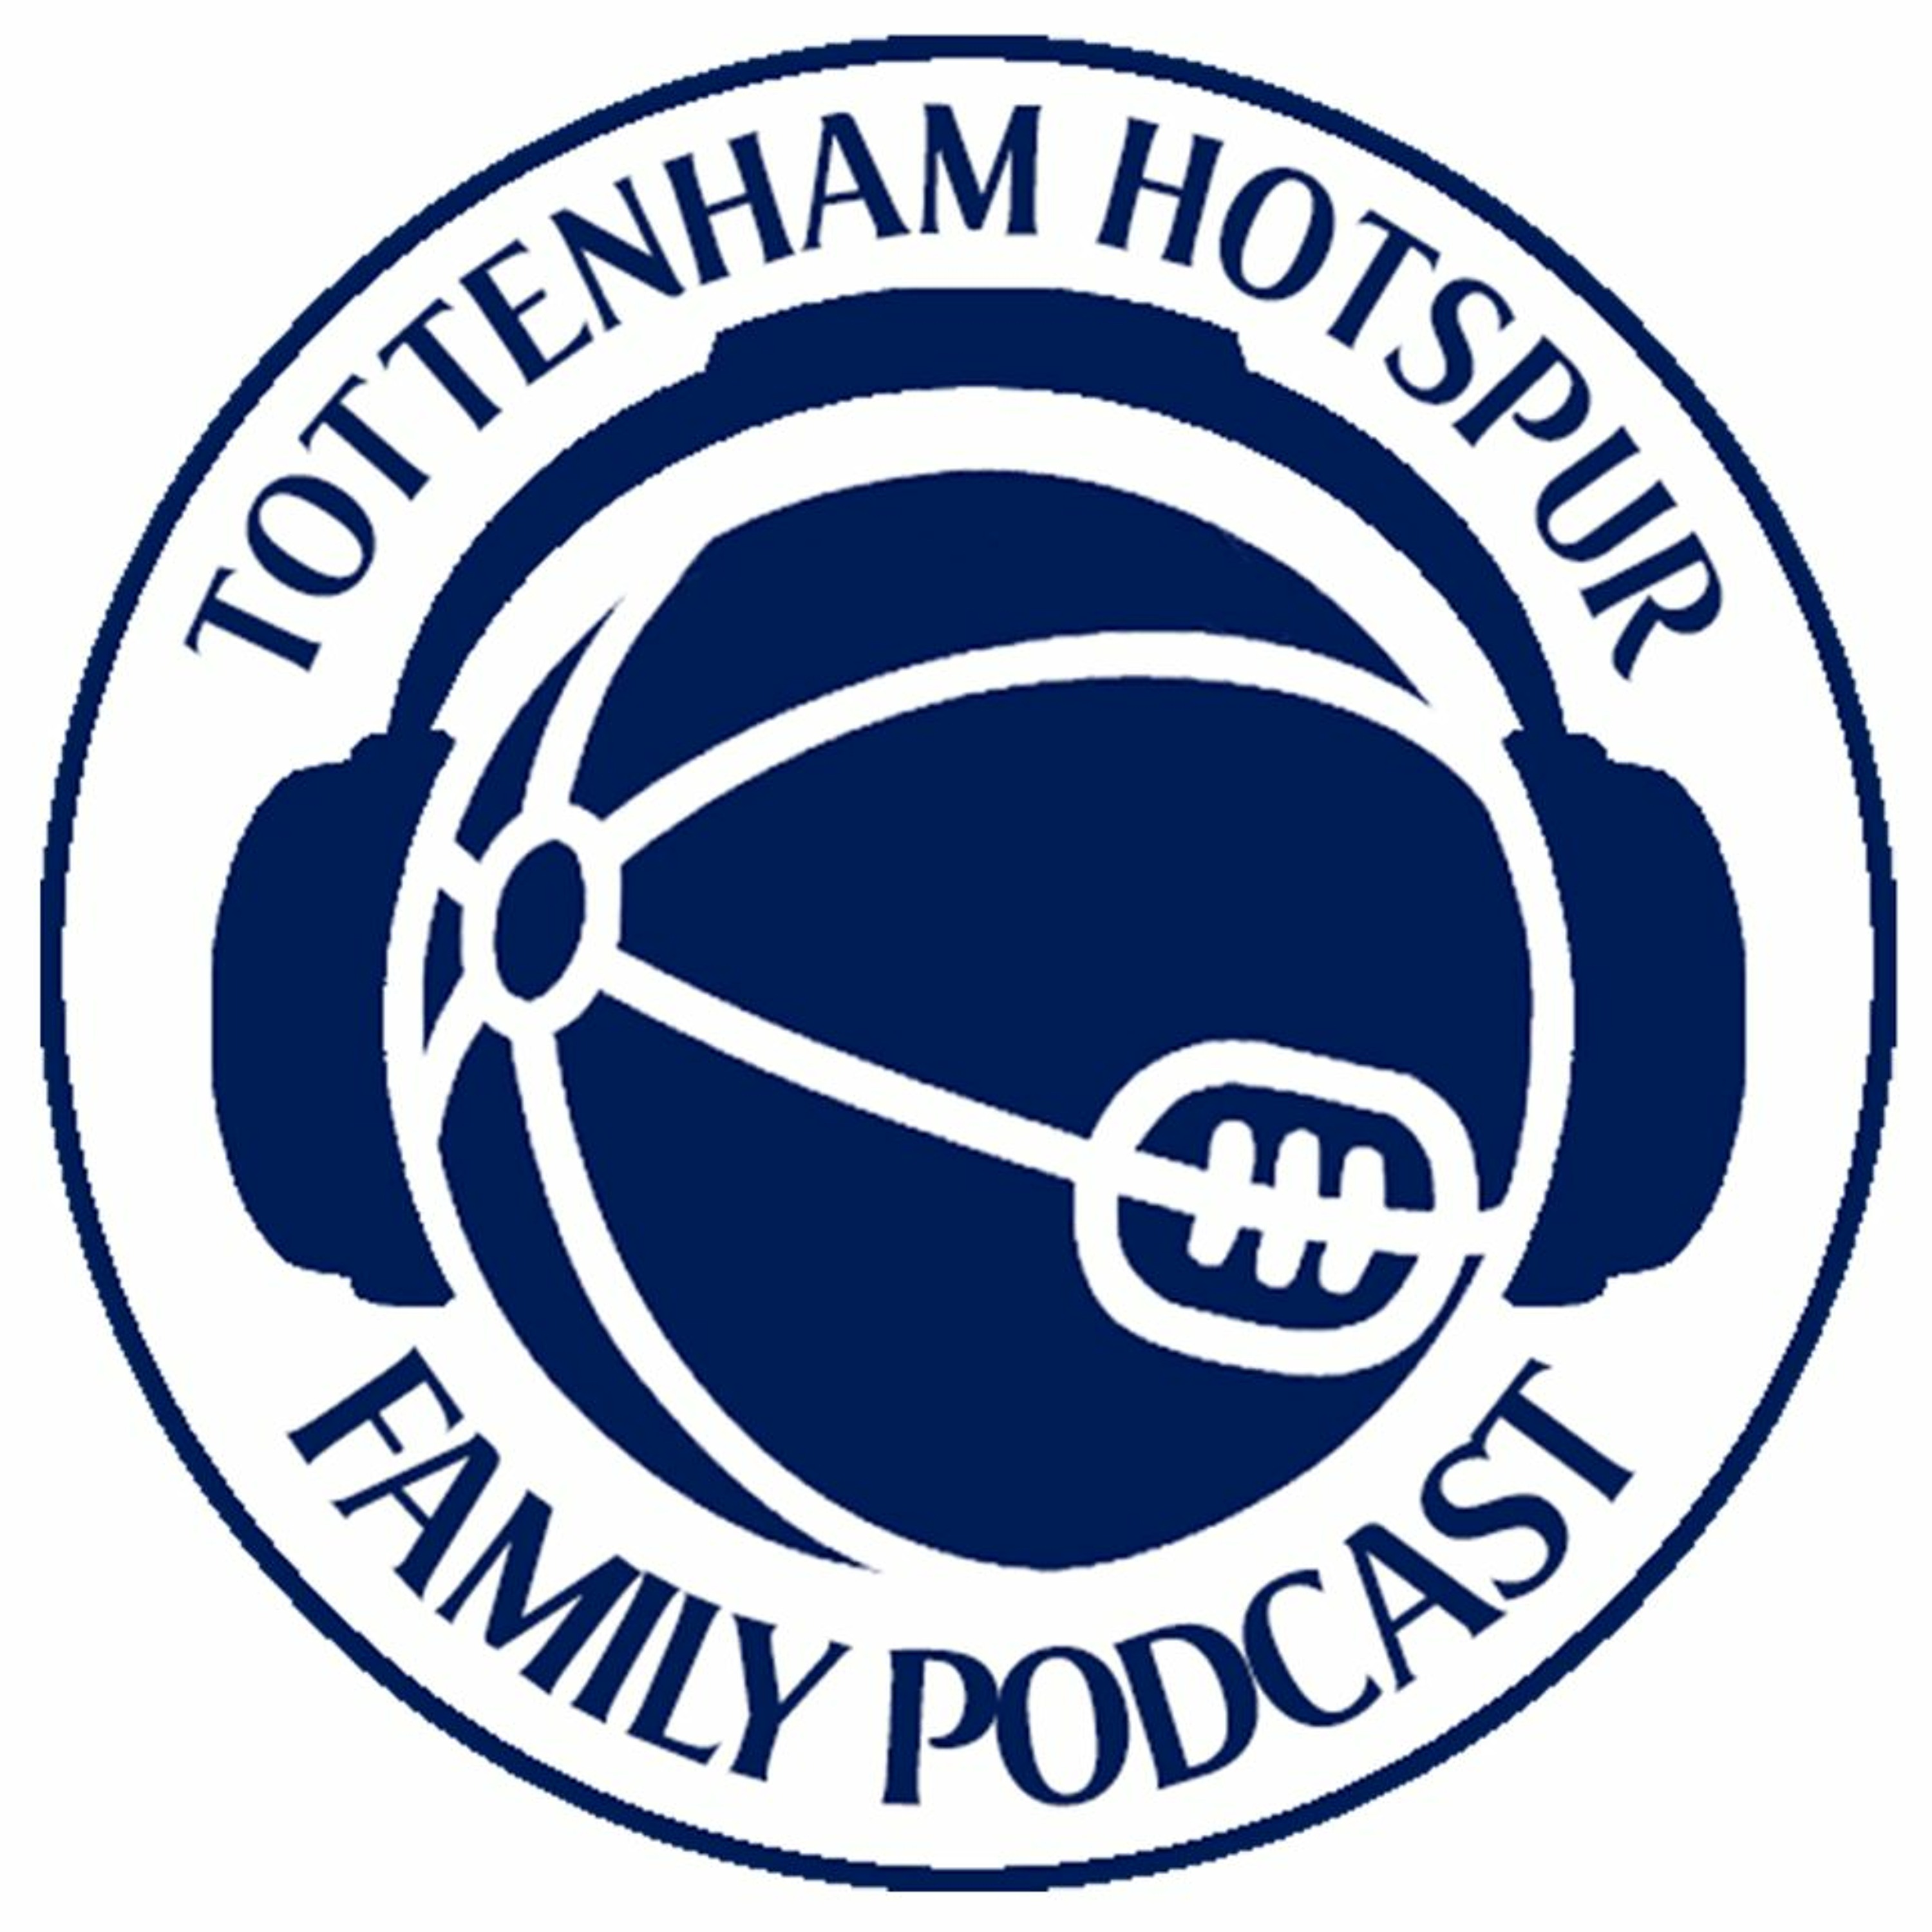 The Tottenham Hotspur Family Podcast - S5EP24 The Late, late show